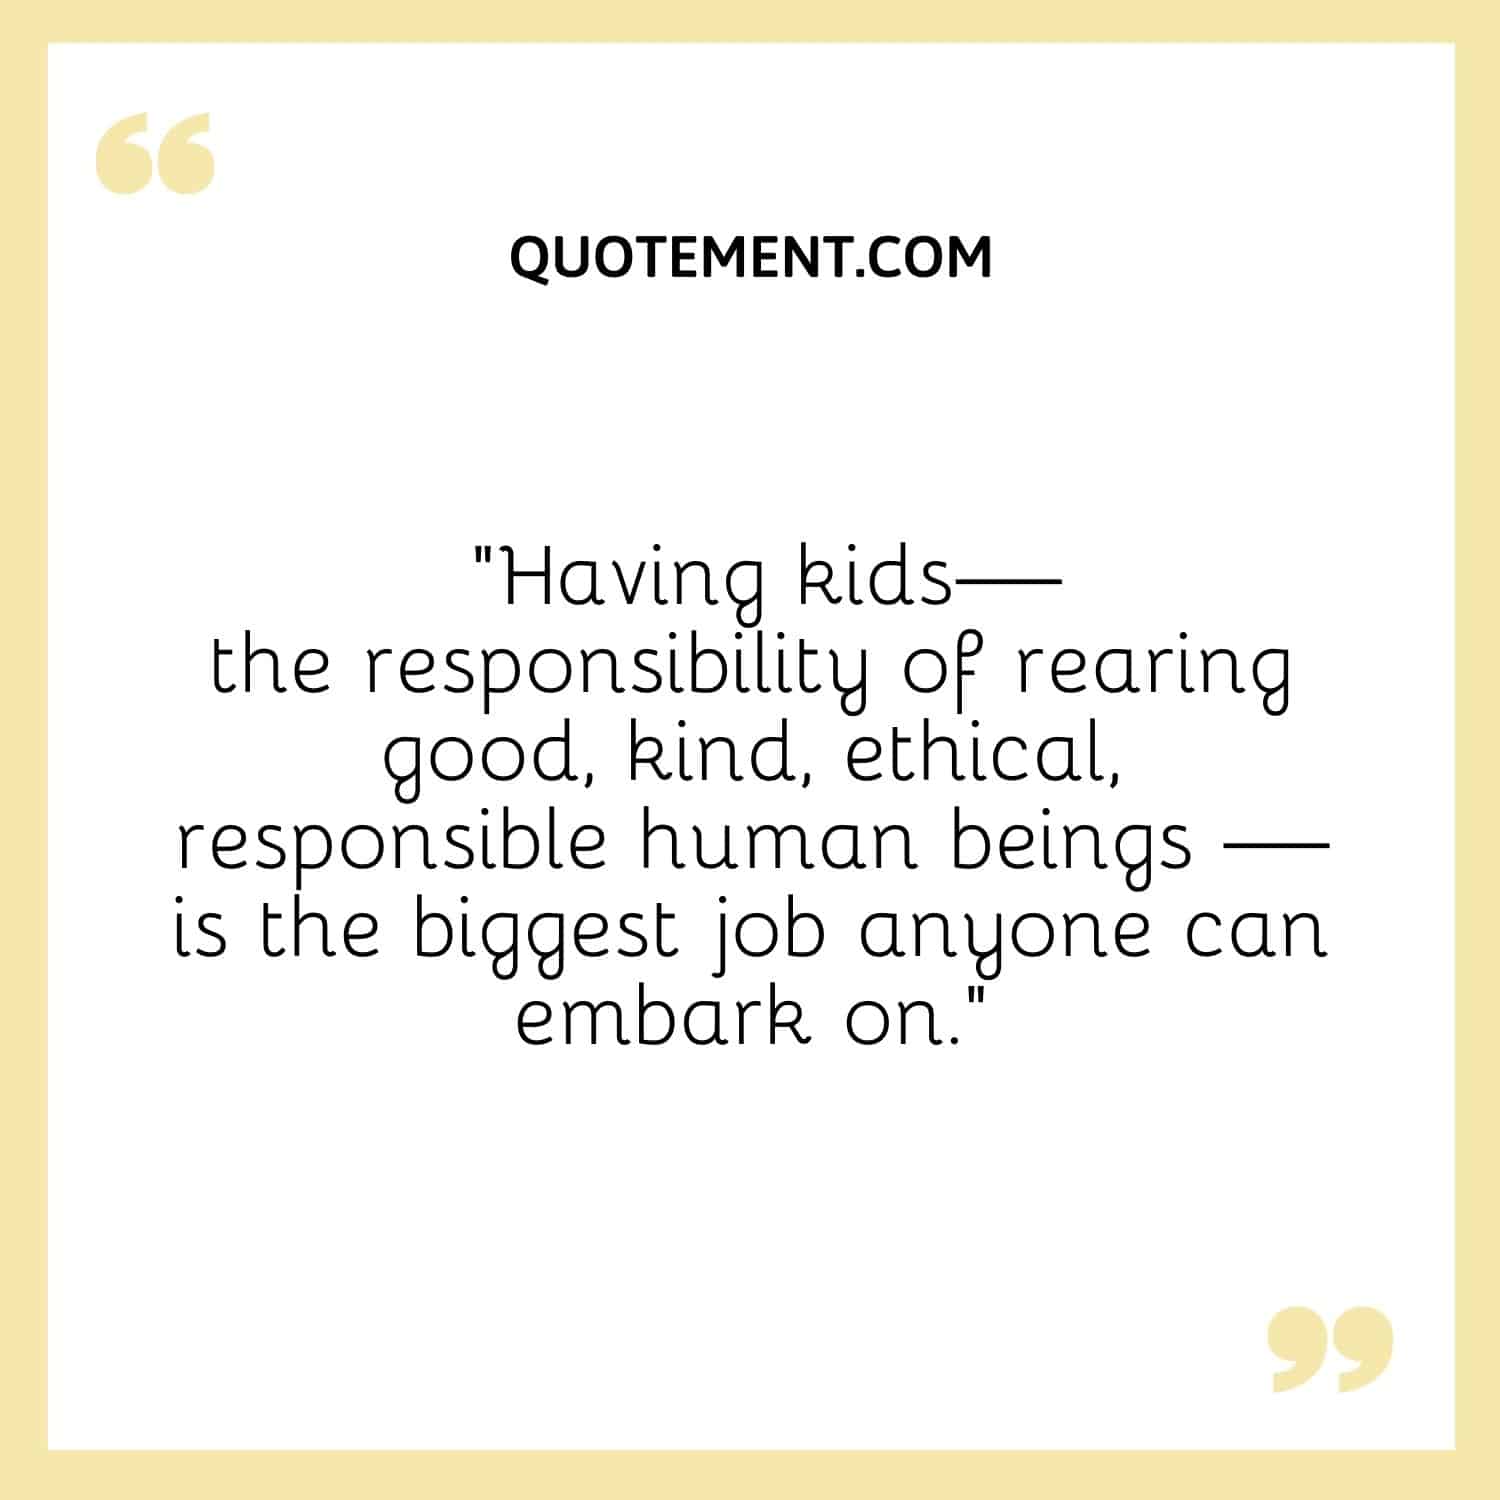 Having kids—the responsibility of rearing good, kind, ethical, responsible human beings